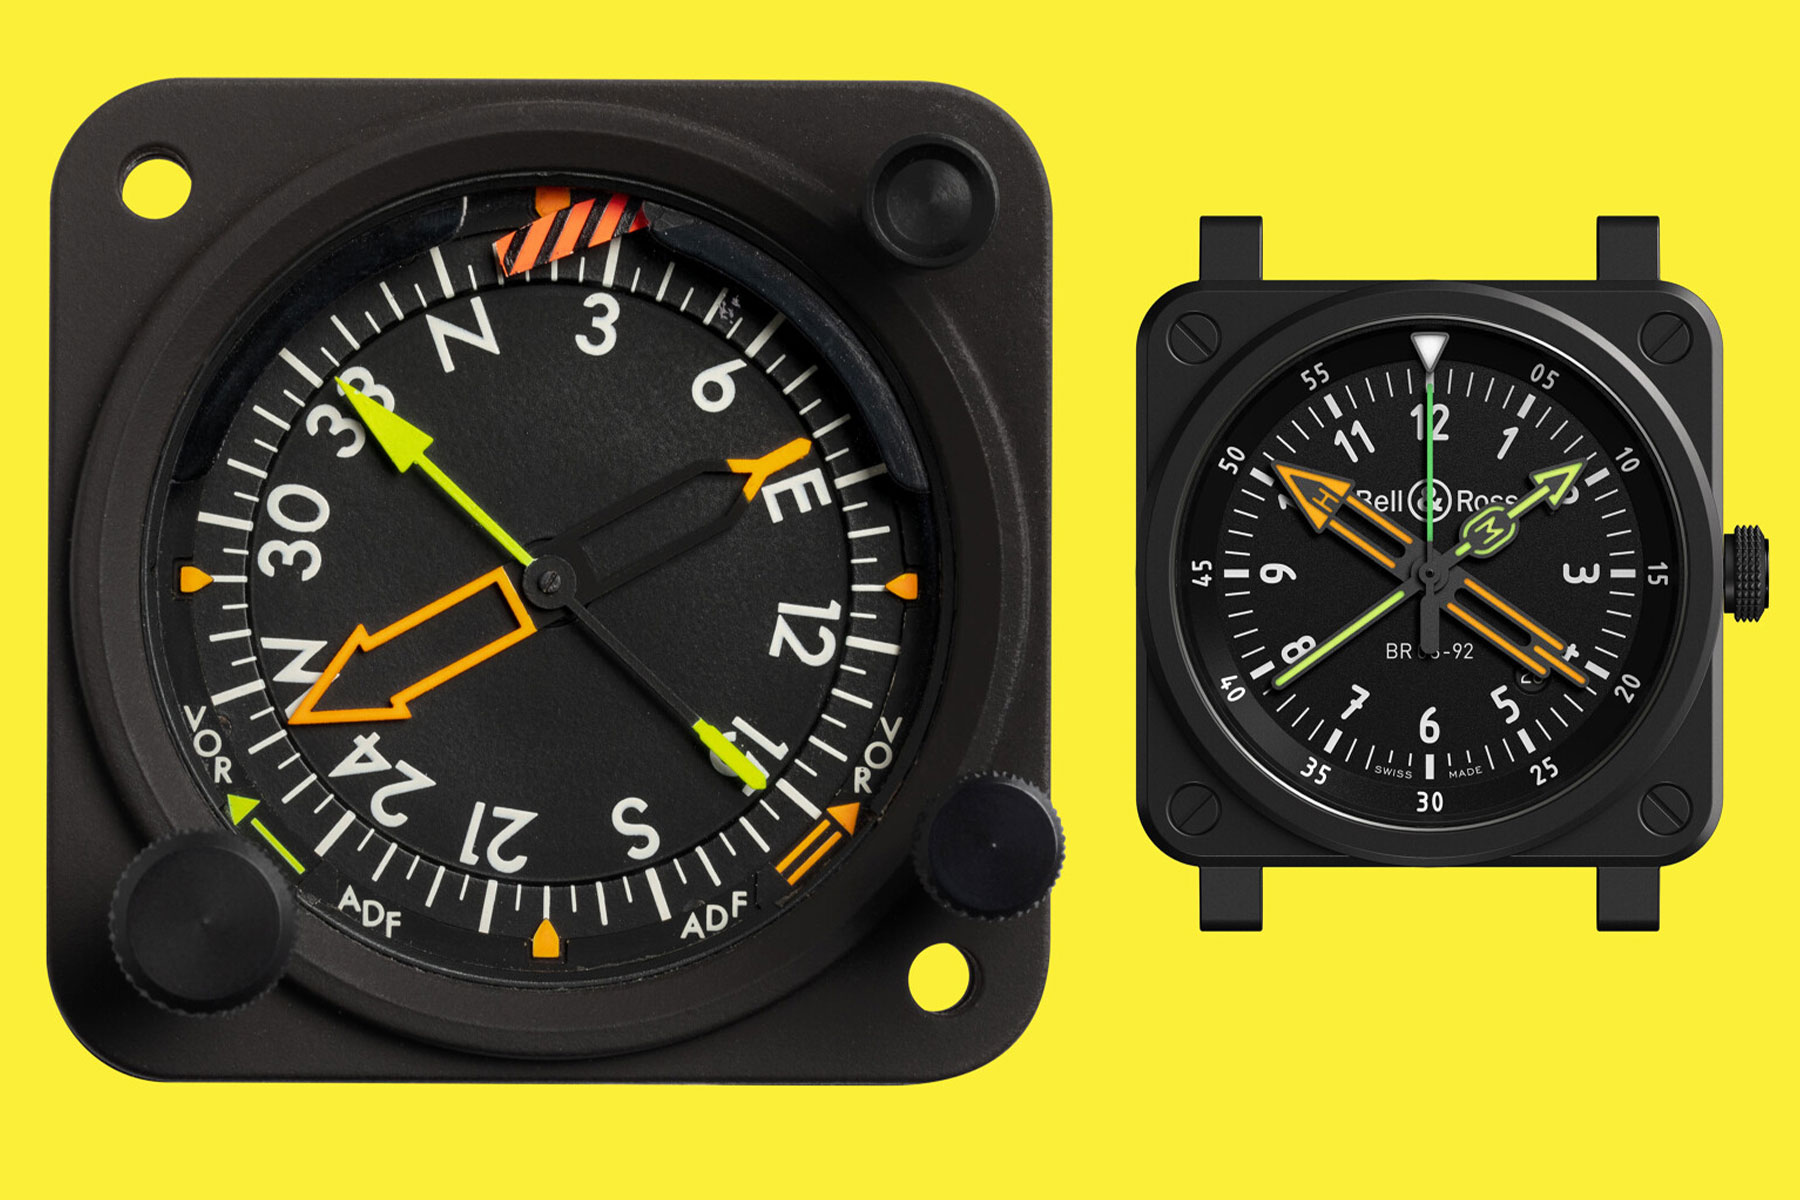 Bell Ross Br 03 92 Radio Compass Featured